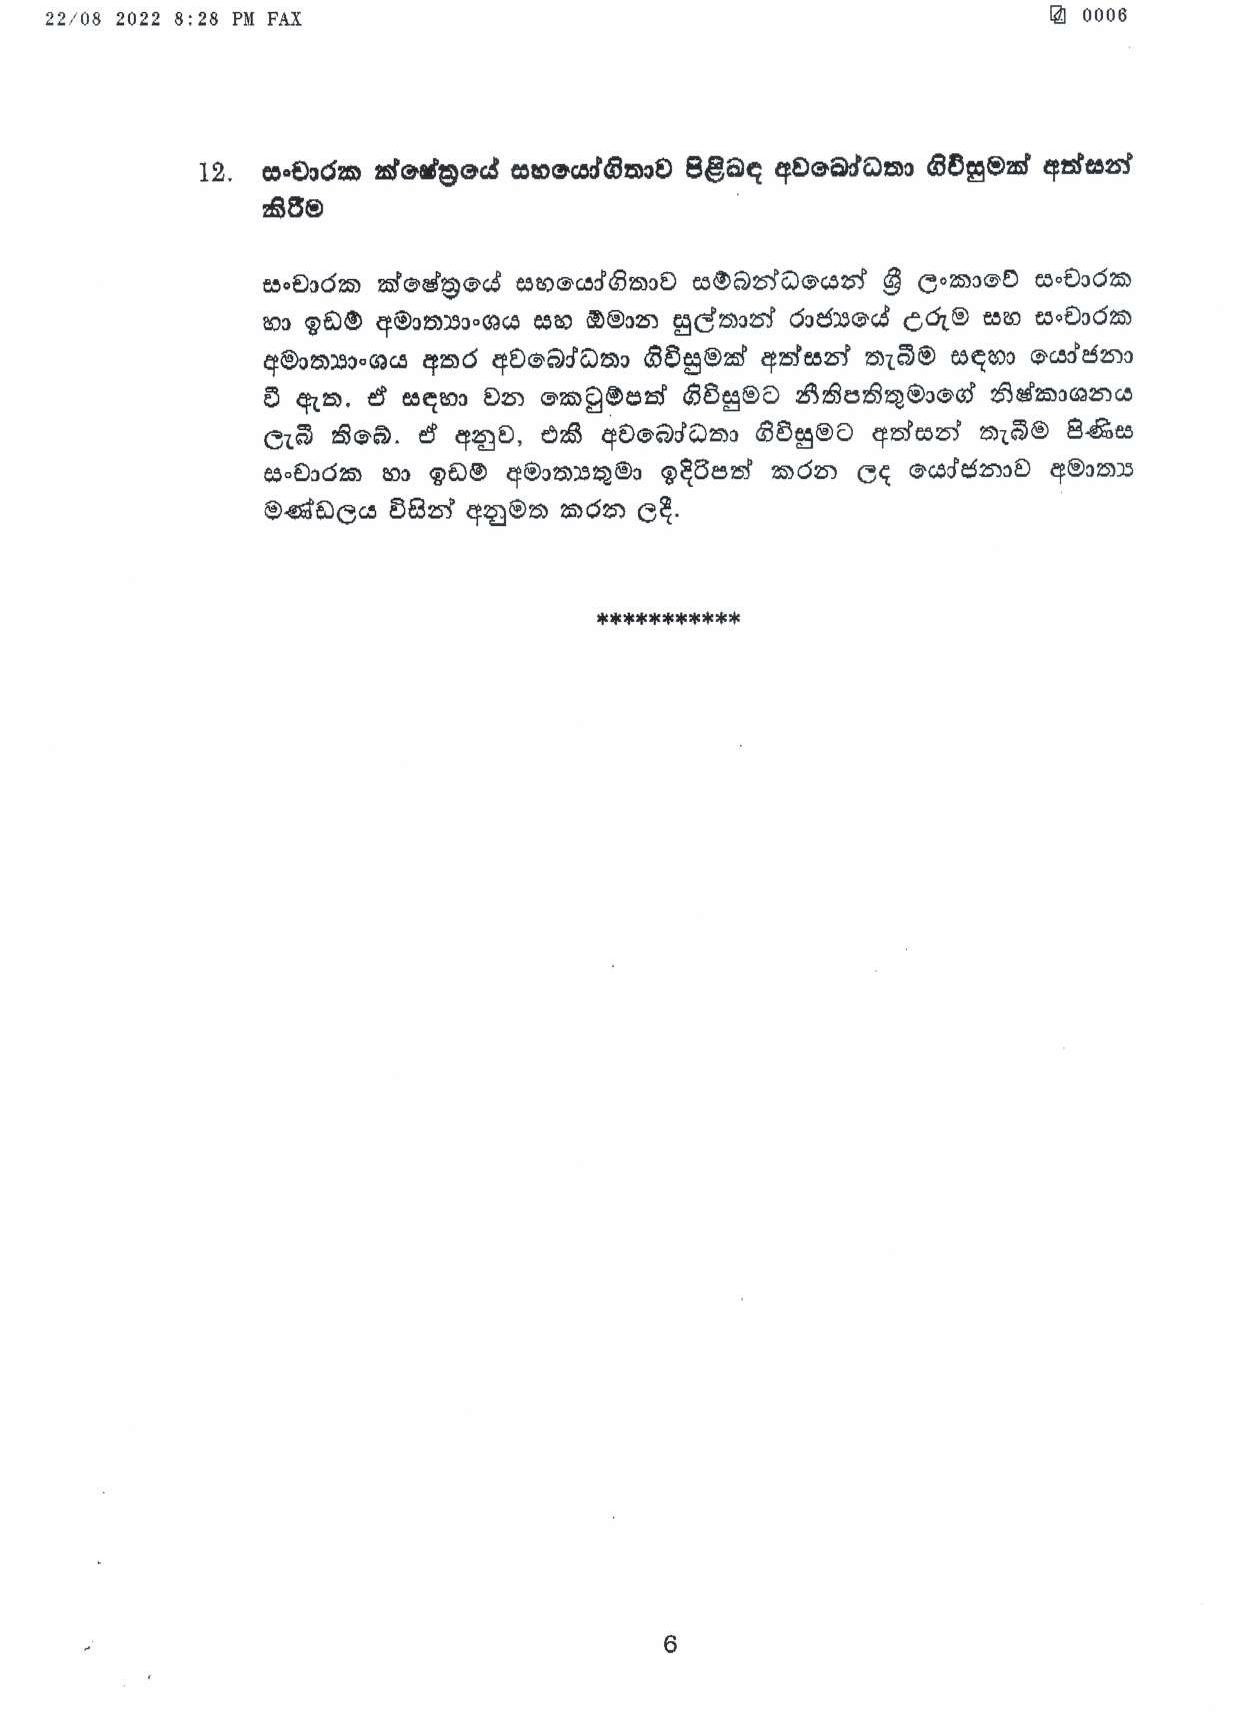 Cabinet decision on 22.08.2022 page 006